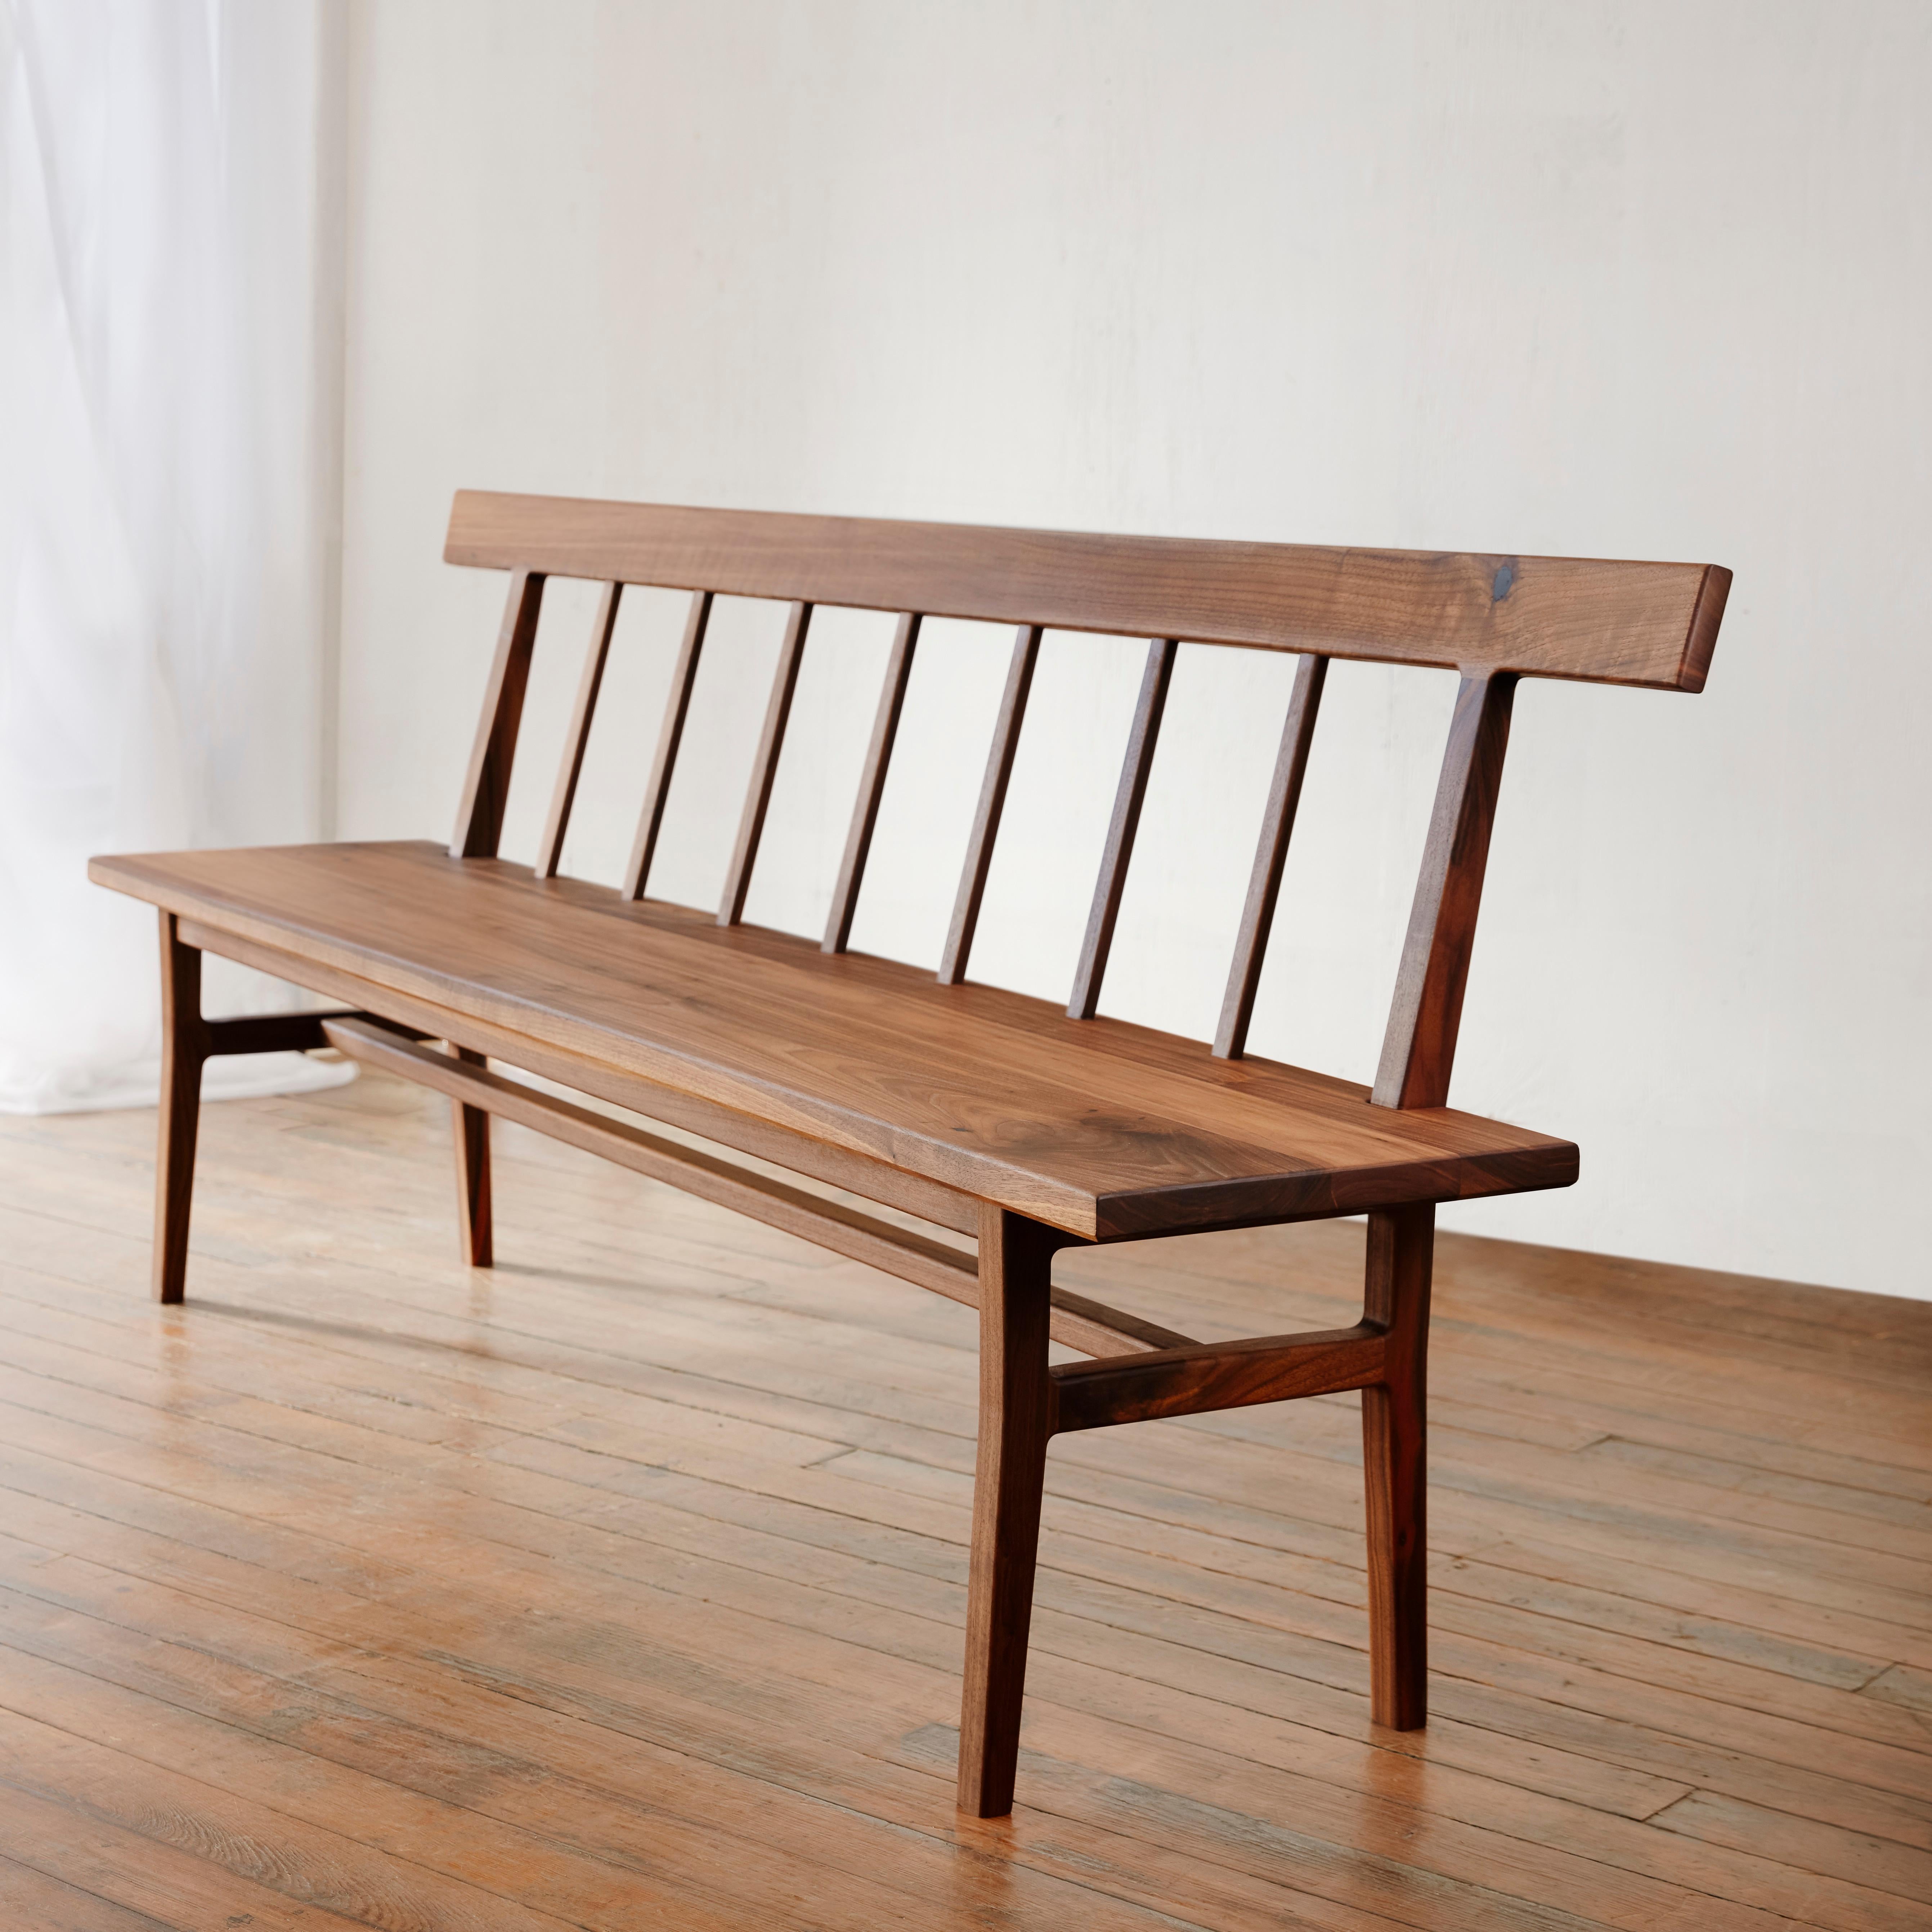 A clean modernization of a Classic Windsor bench, this settee features sculpted legs and slats instead of dowels and spindles. Constructed from sustainable walnut, the settee is artisan crafted with traditional joinery and finished with an